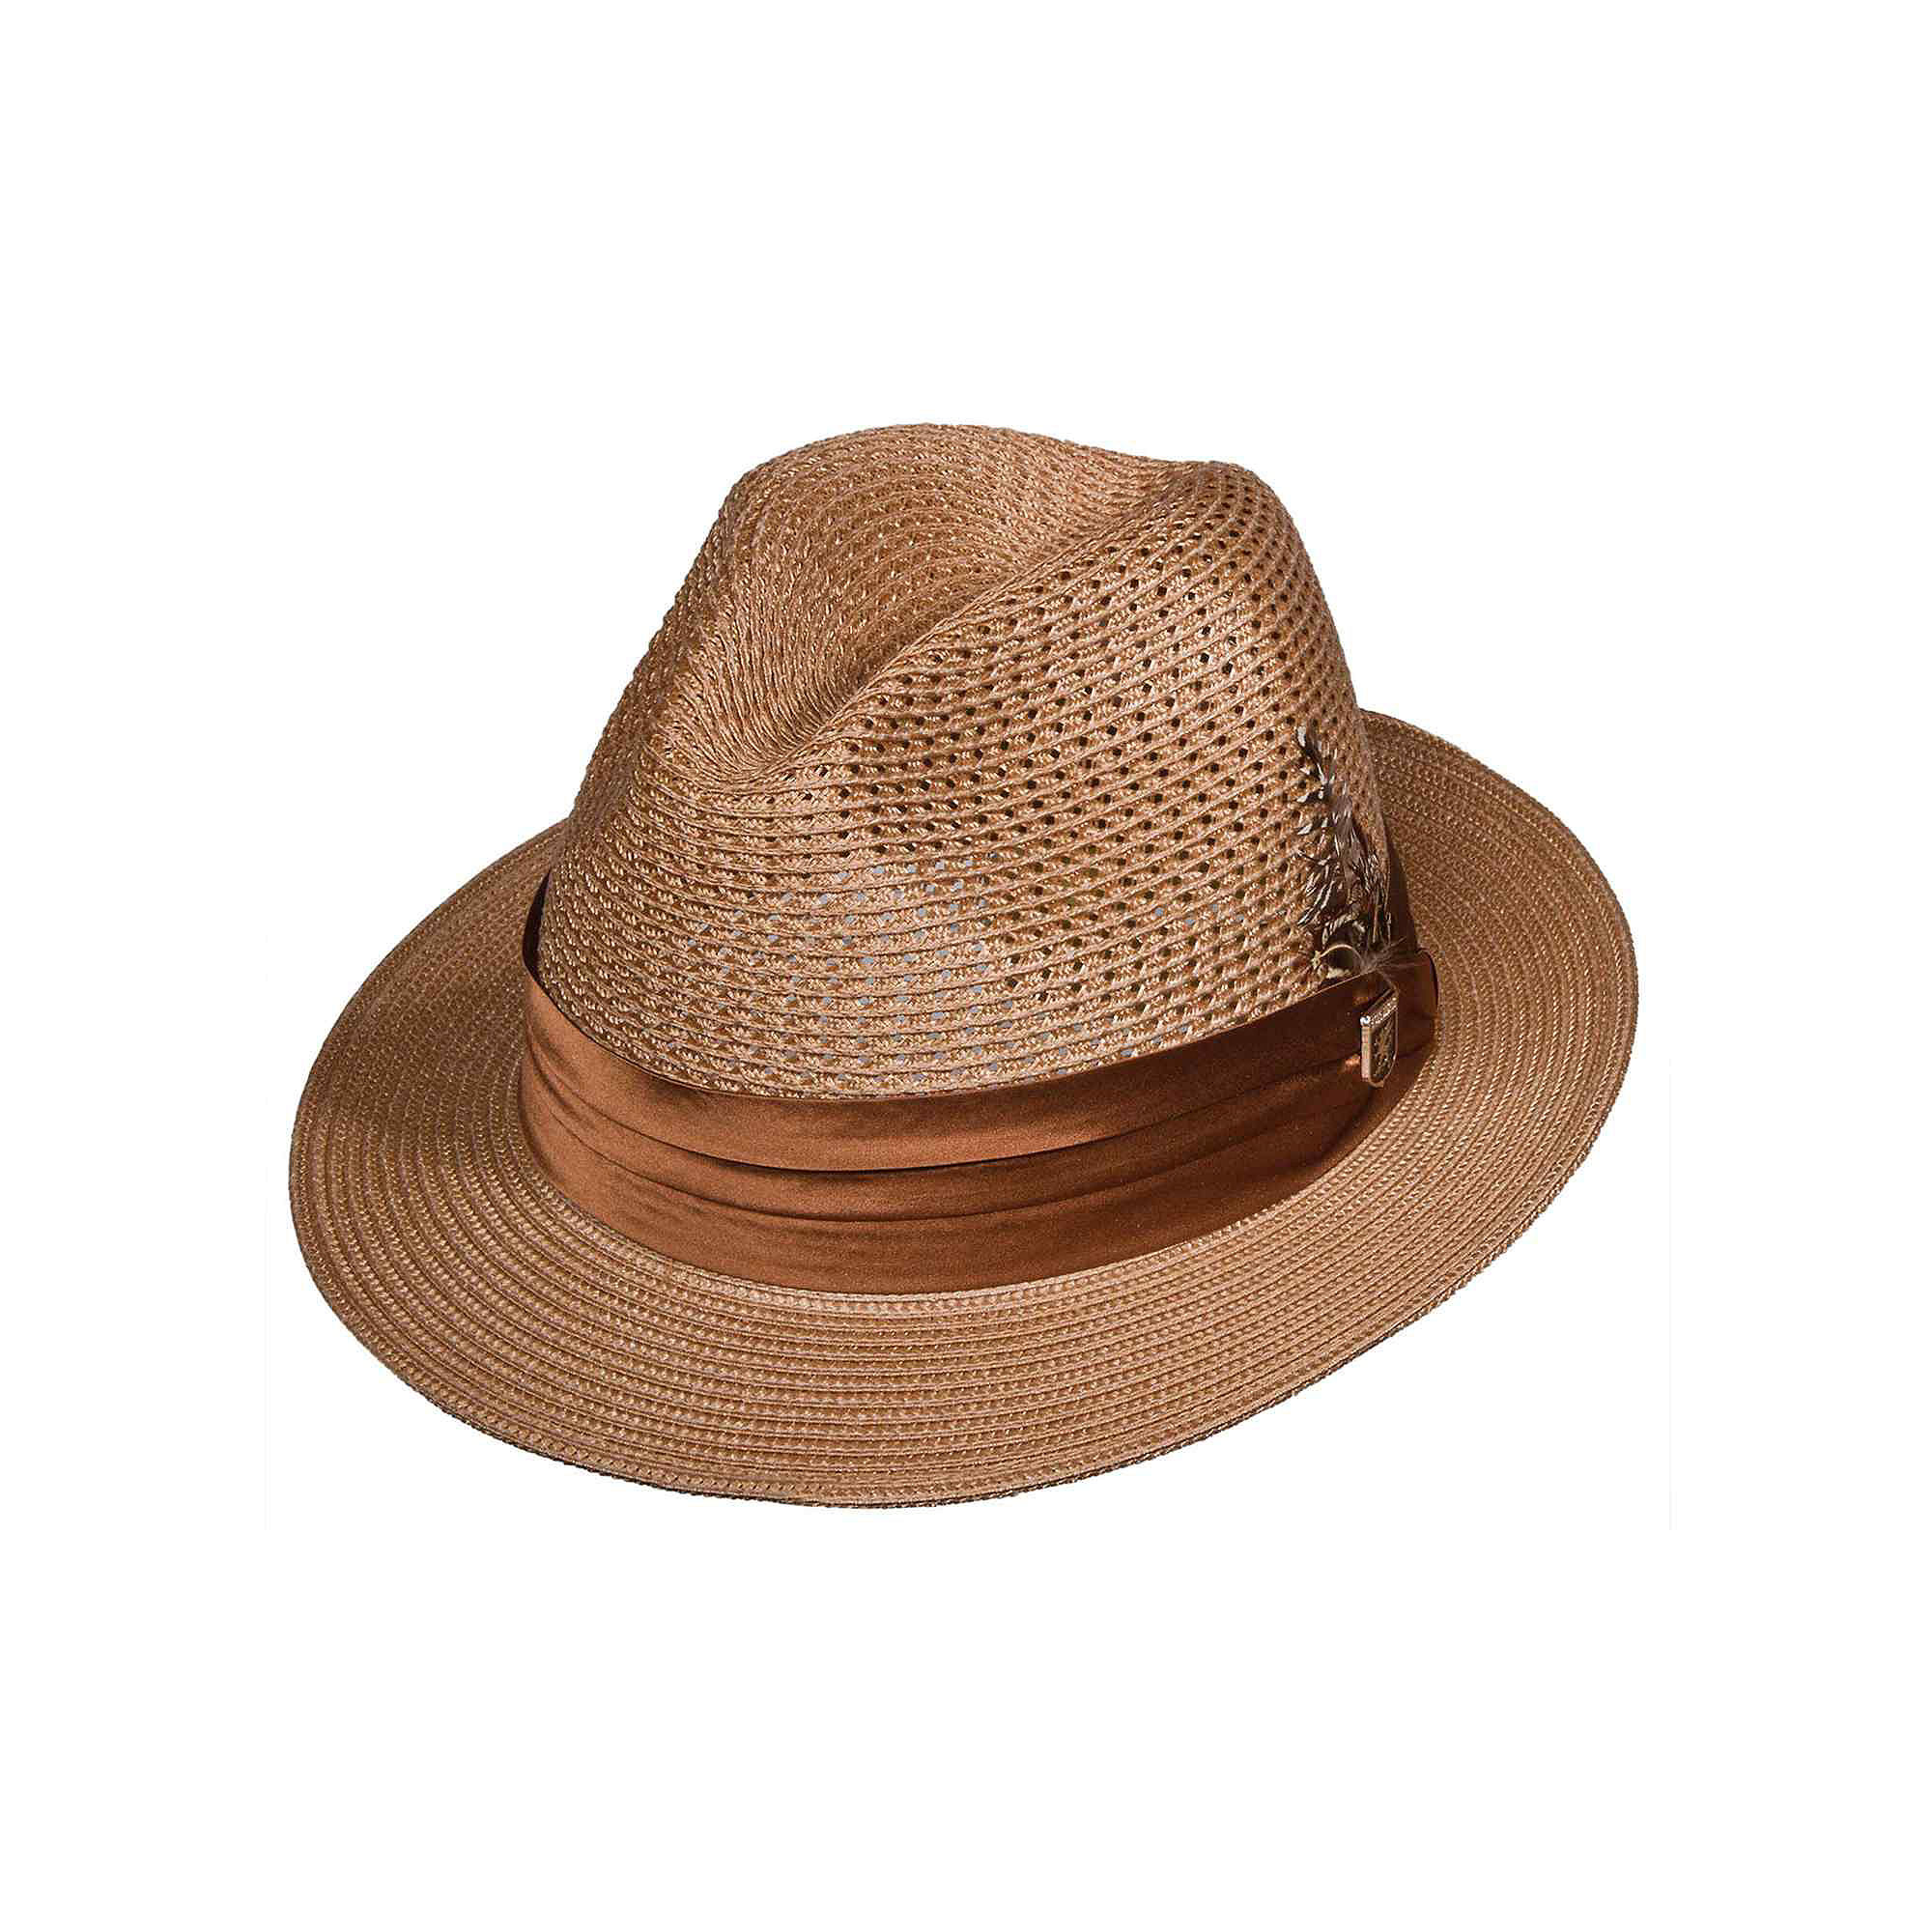 UPC 016698000369 product image for Stacy Adams Straw Pinch-Front Fedora | upcitemdb.com